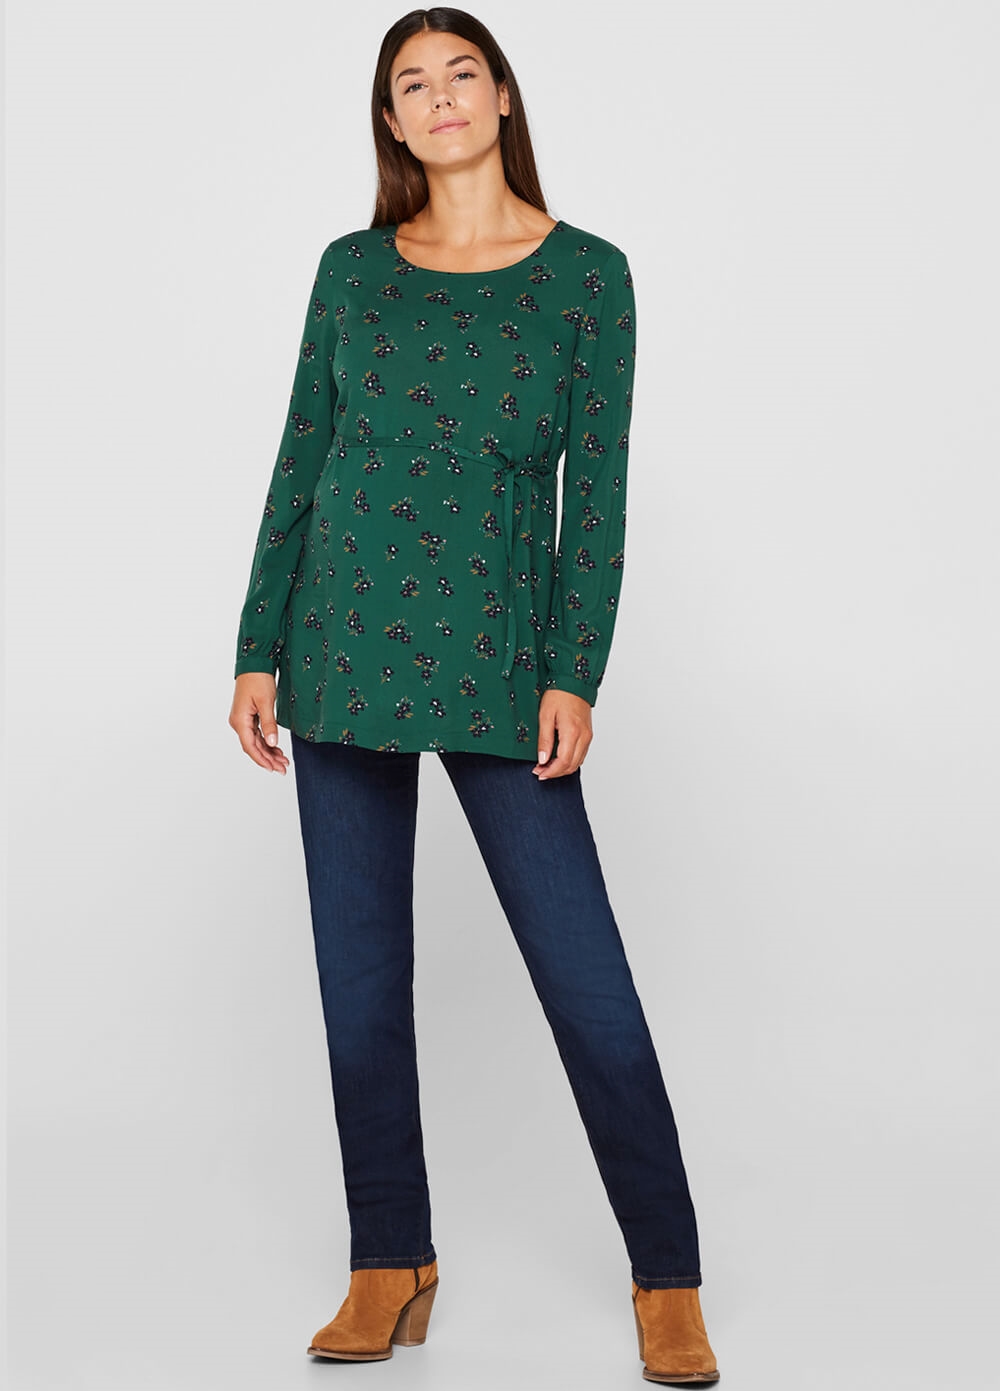 Esprit - Green Floral Viscose Maternity Blouse | Queen Bee